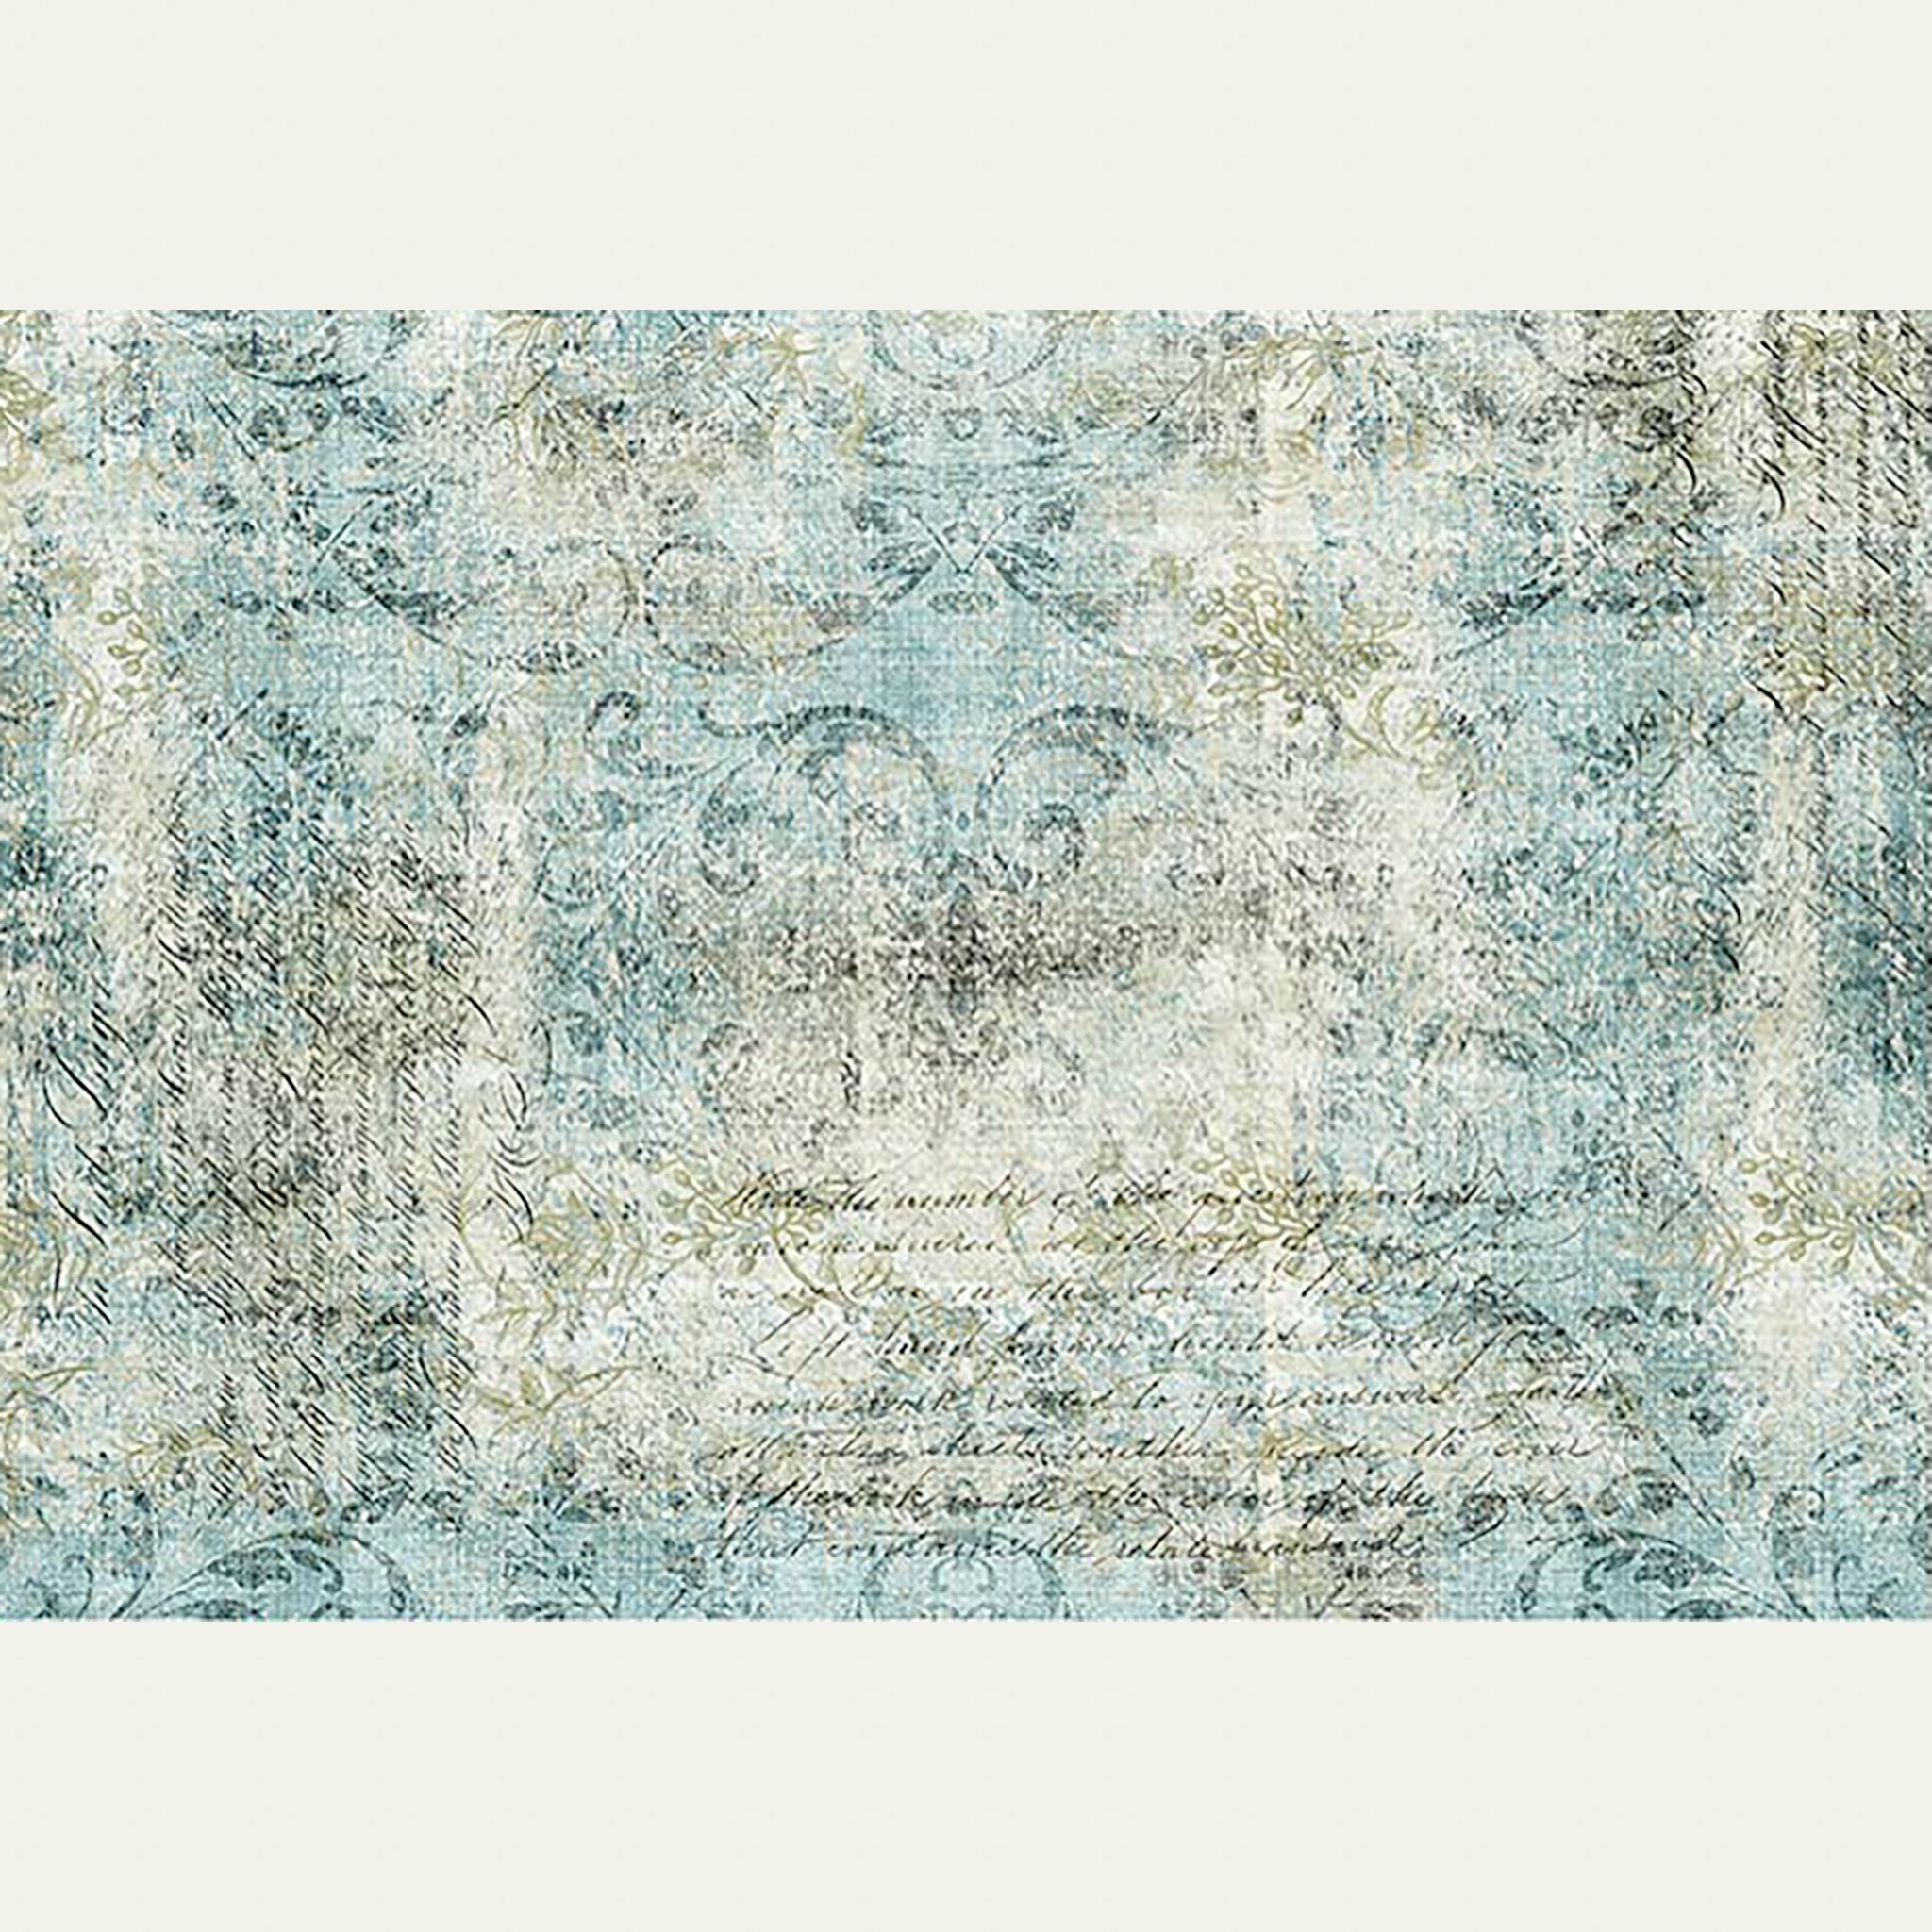 A2 rice decoupage paper of a faded light blue and cream colored fabric that has a worn damask scroll design and script writing. Soft white borders on the top and bottom.